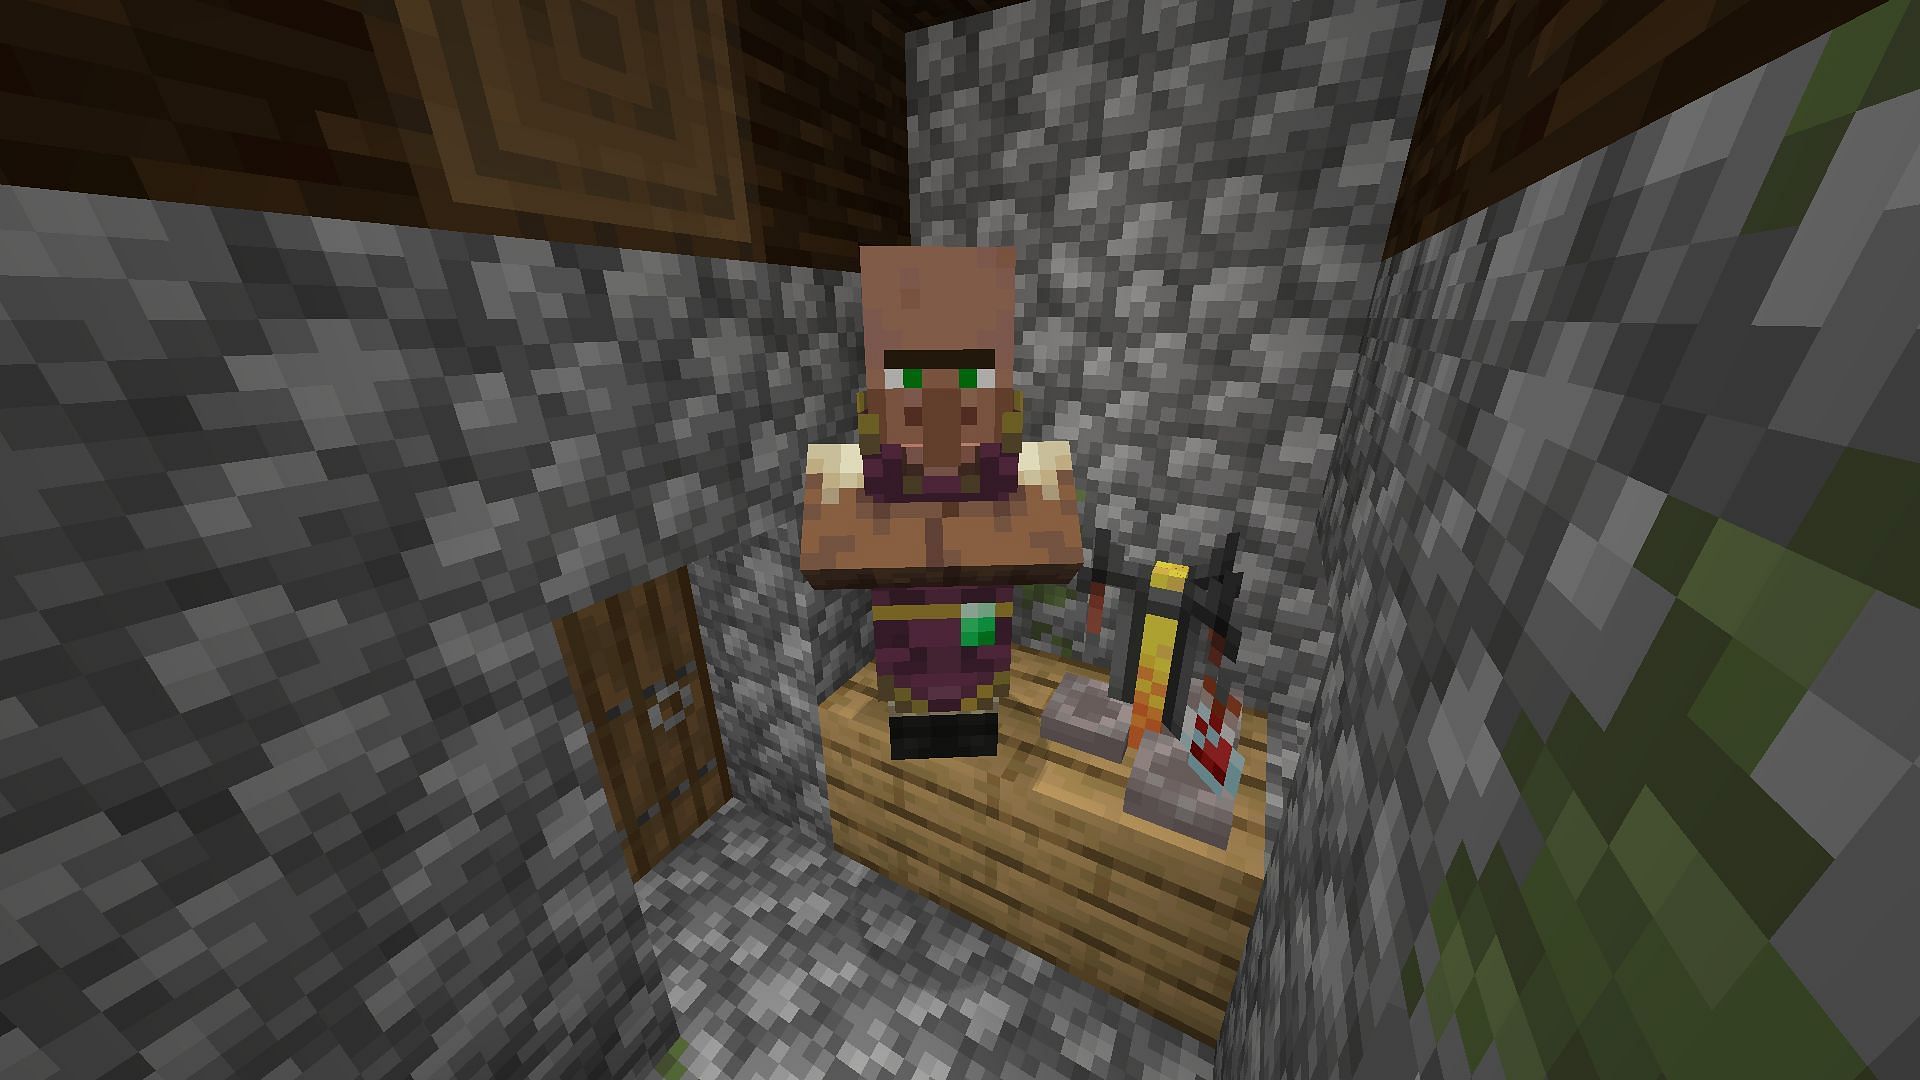 Several conditions need to be met in order to breed villagers in Minecraft (Image via Mojang)